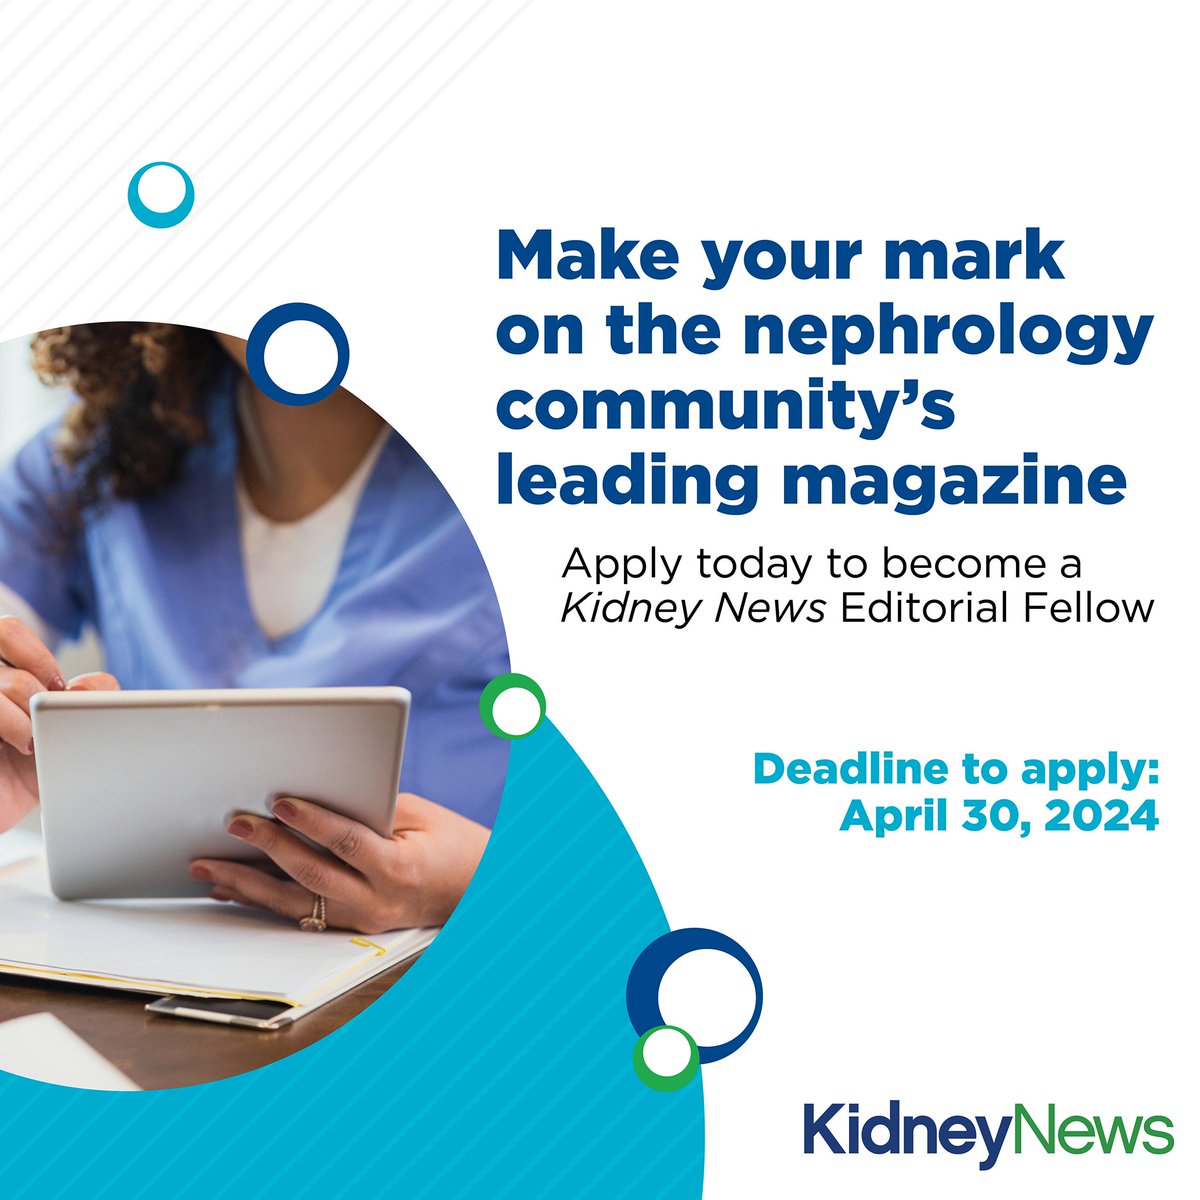 📢Attention nephrology fellows: The deadline to apply for the Kidney News Editorial Fellows Program has been extended to May 15! Don't miss this opportunity to make your mark on Kidney News! For more information on how to apply, visit bit.ly/KNFellowship